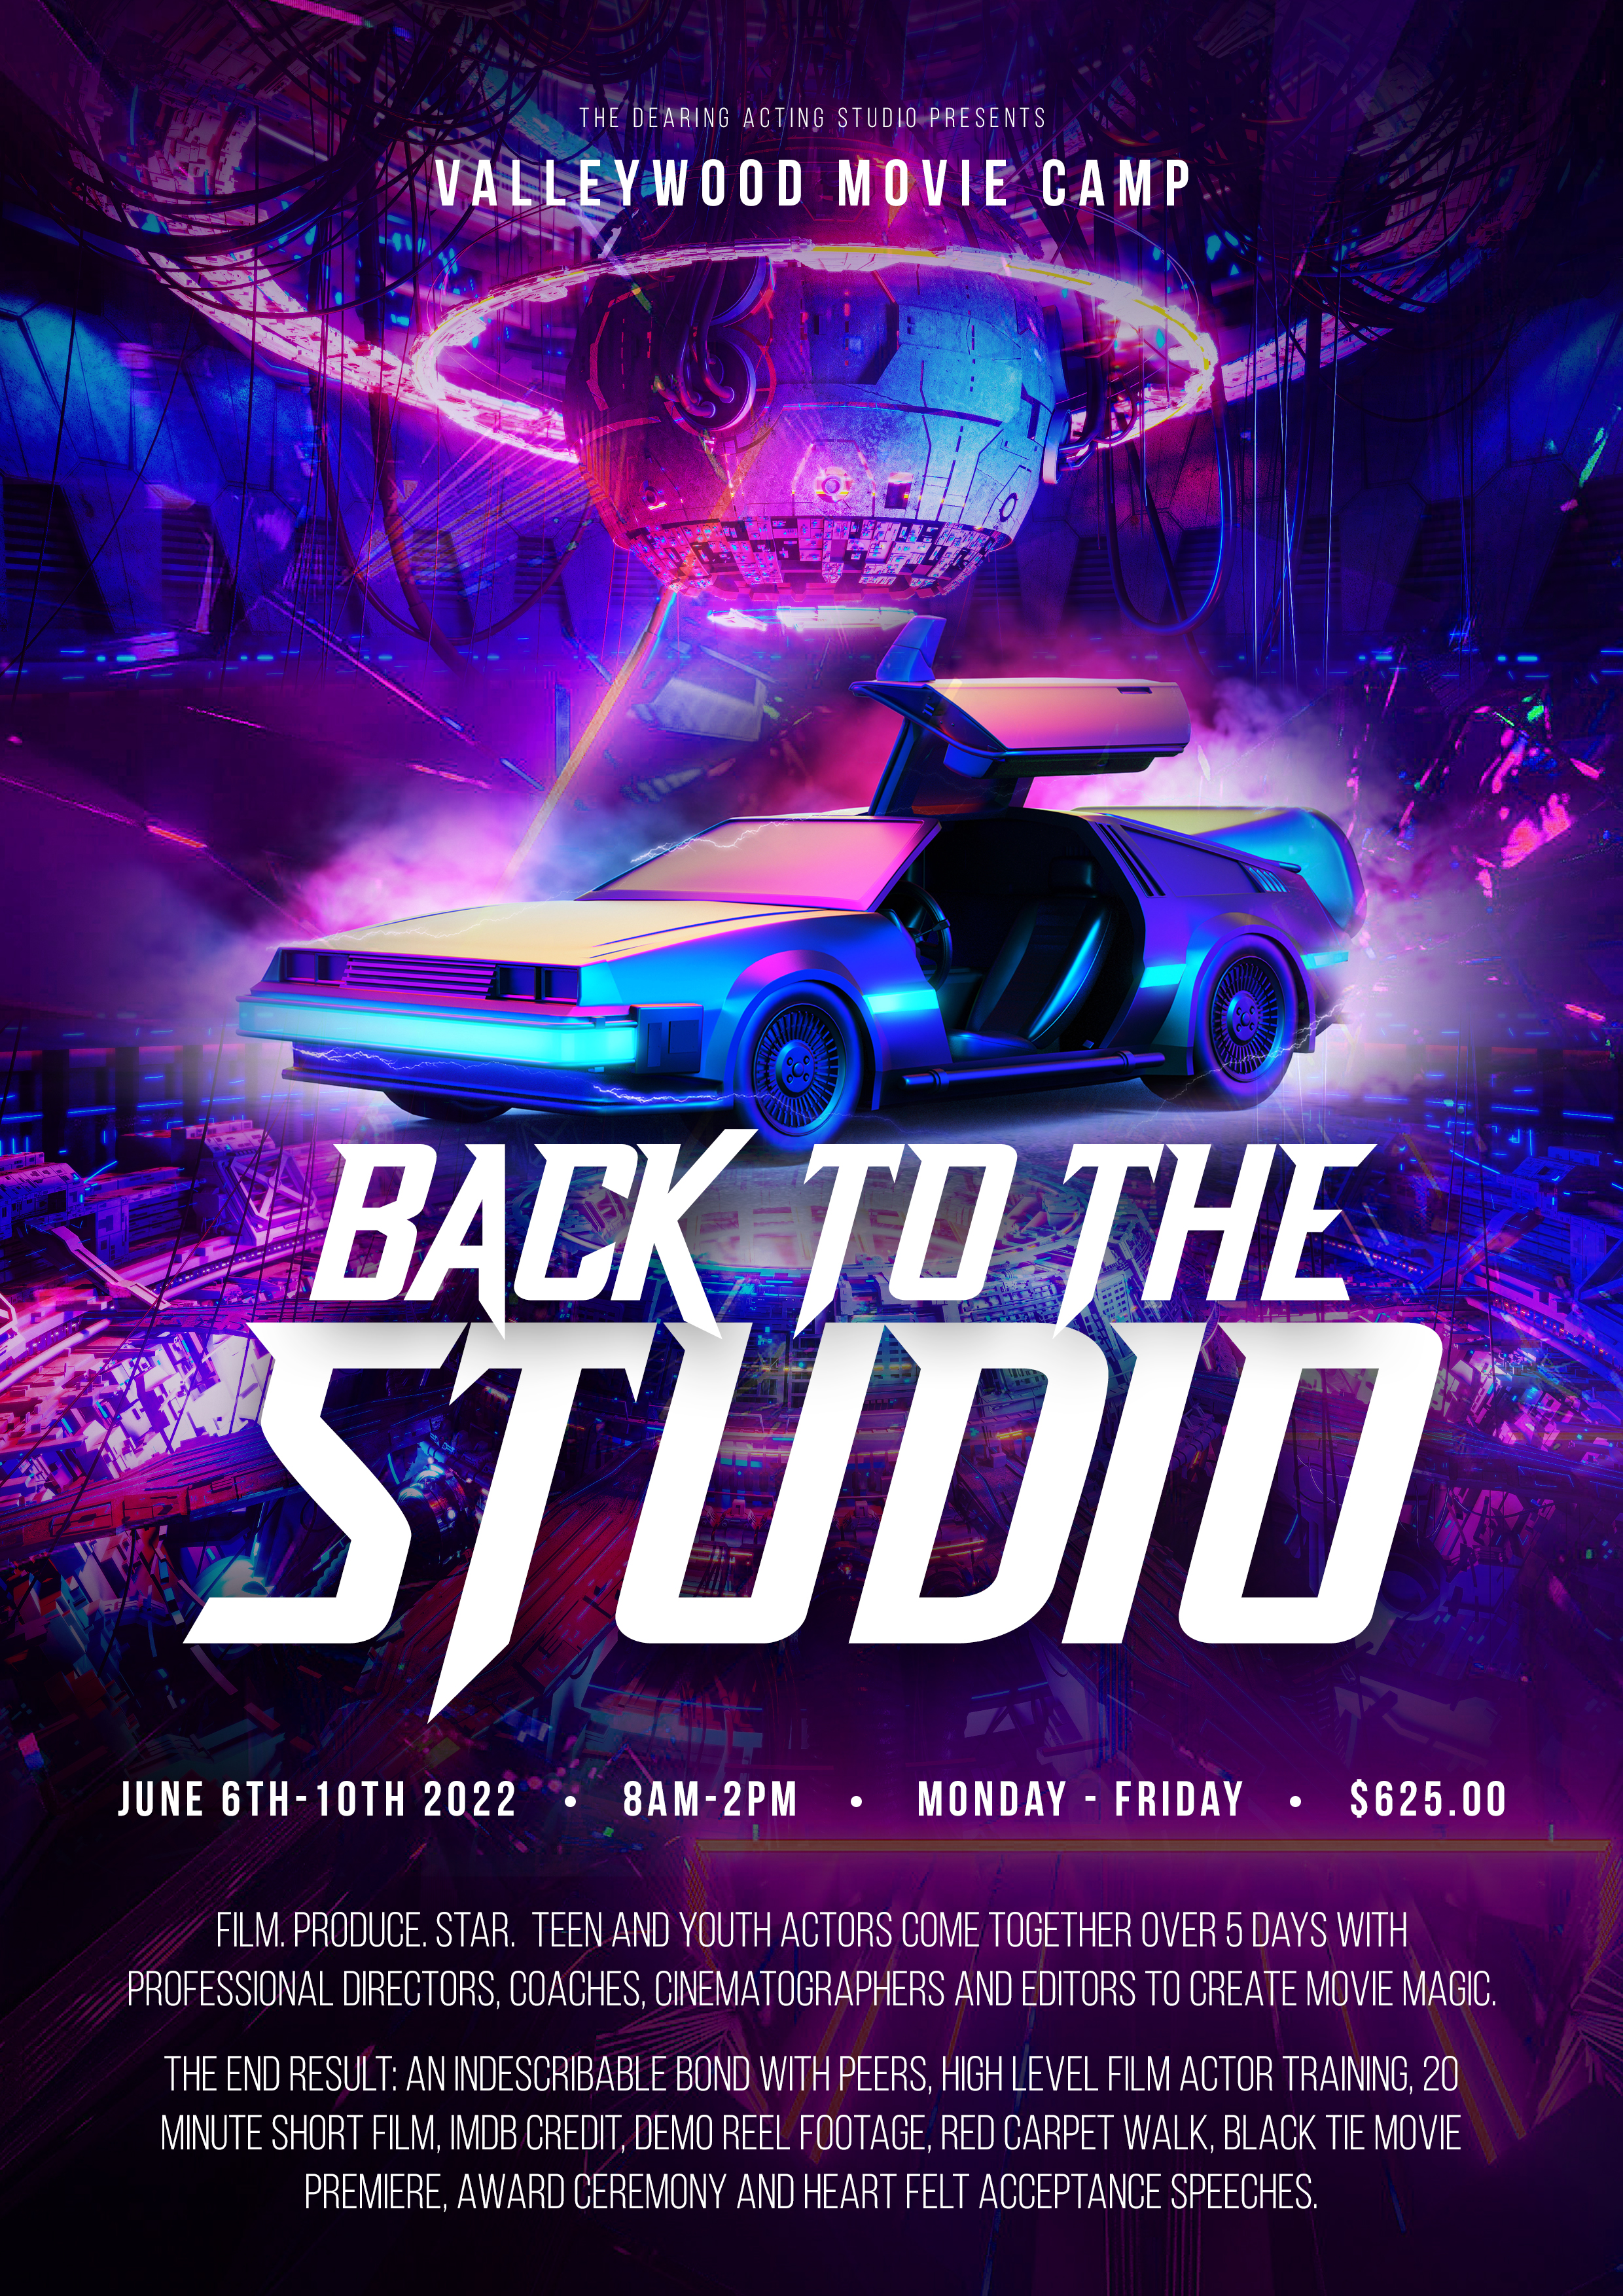 Valleywood Summer Movie Camp - Back to the Studio